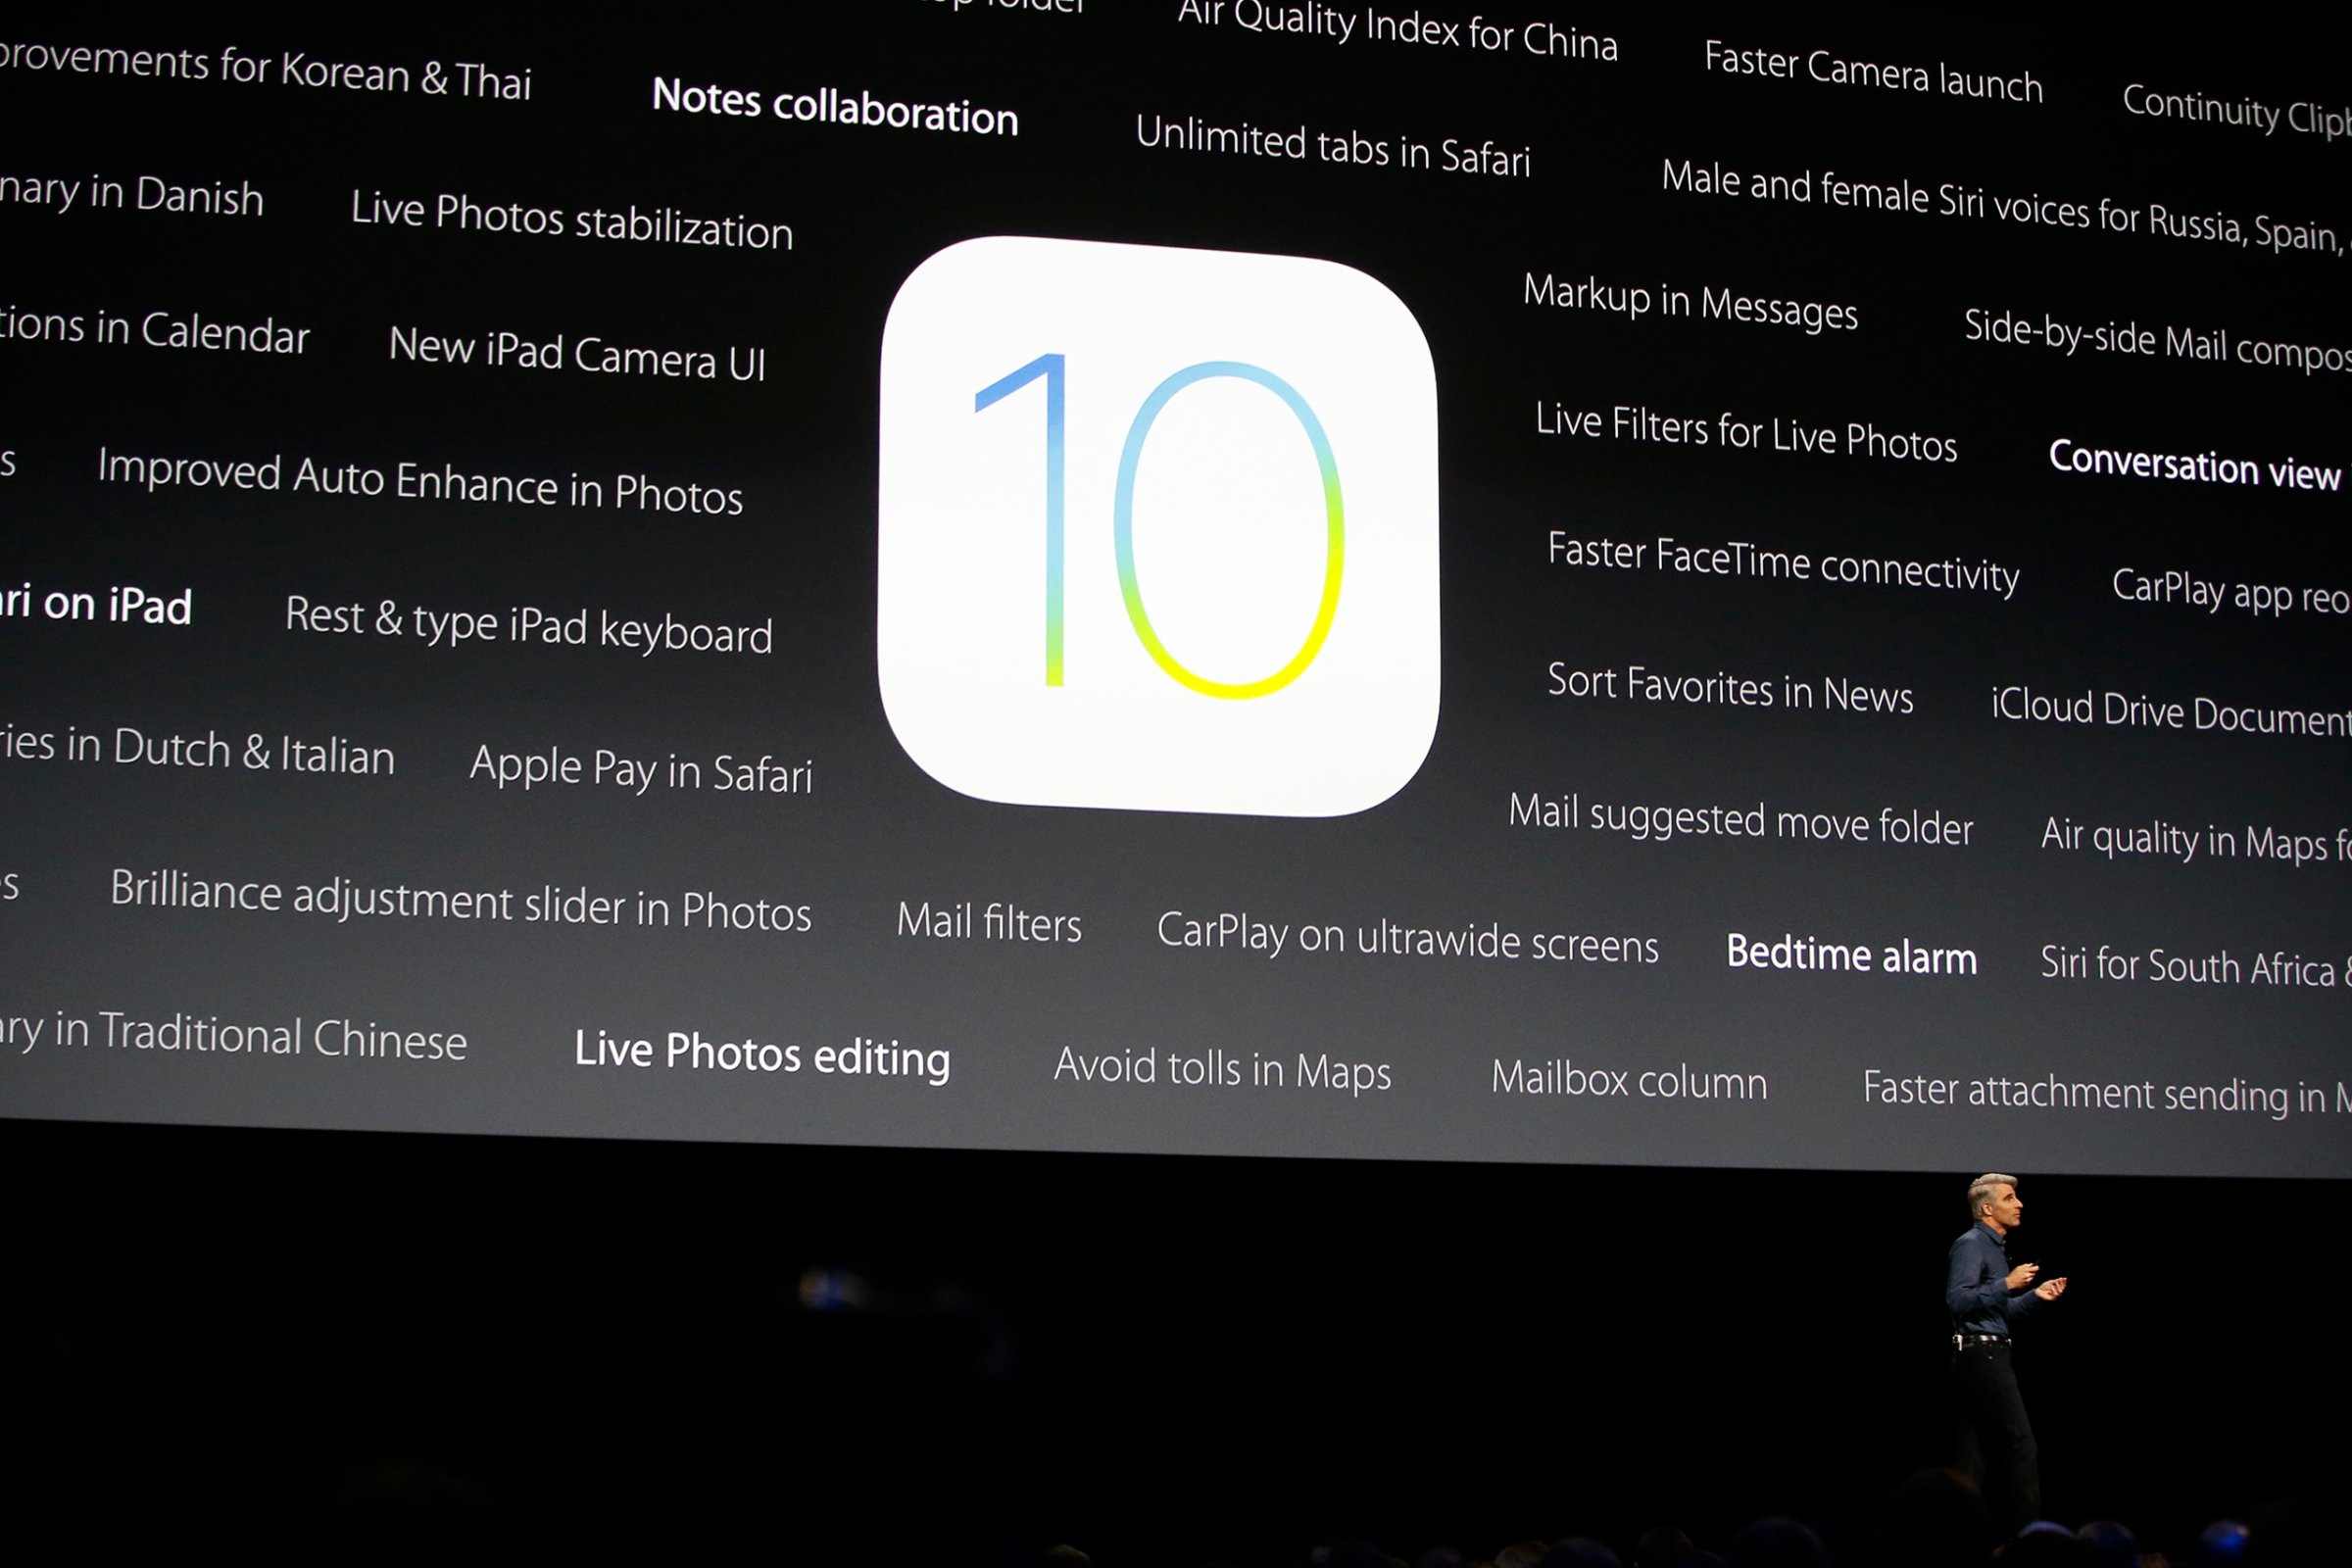 Craig Federighi, Apple senior vice president of software engineering, speaks about the new iOS 10 at the Apple Worldwide Developers Conference in the Bill Graham Civic Auditorium in San Francisco, June 13, 2016.